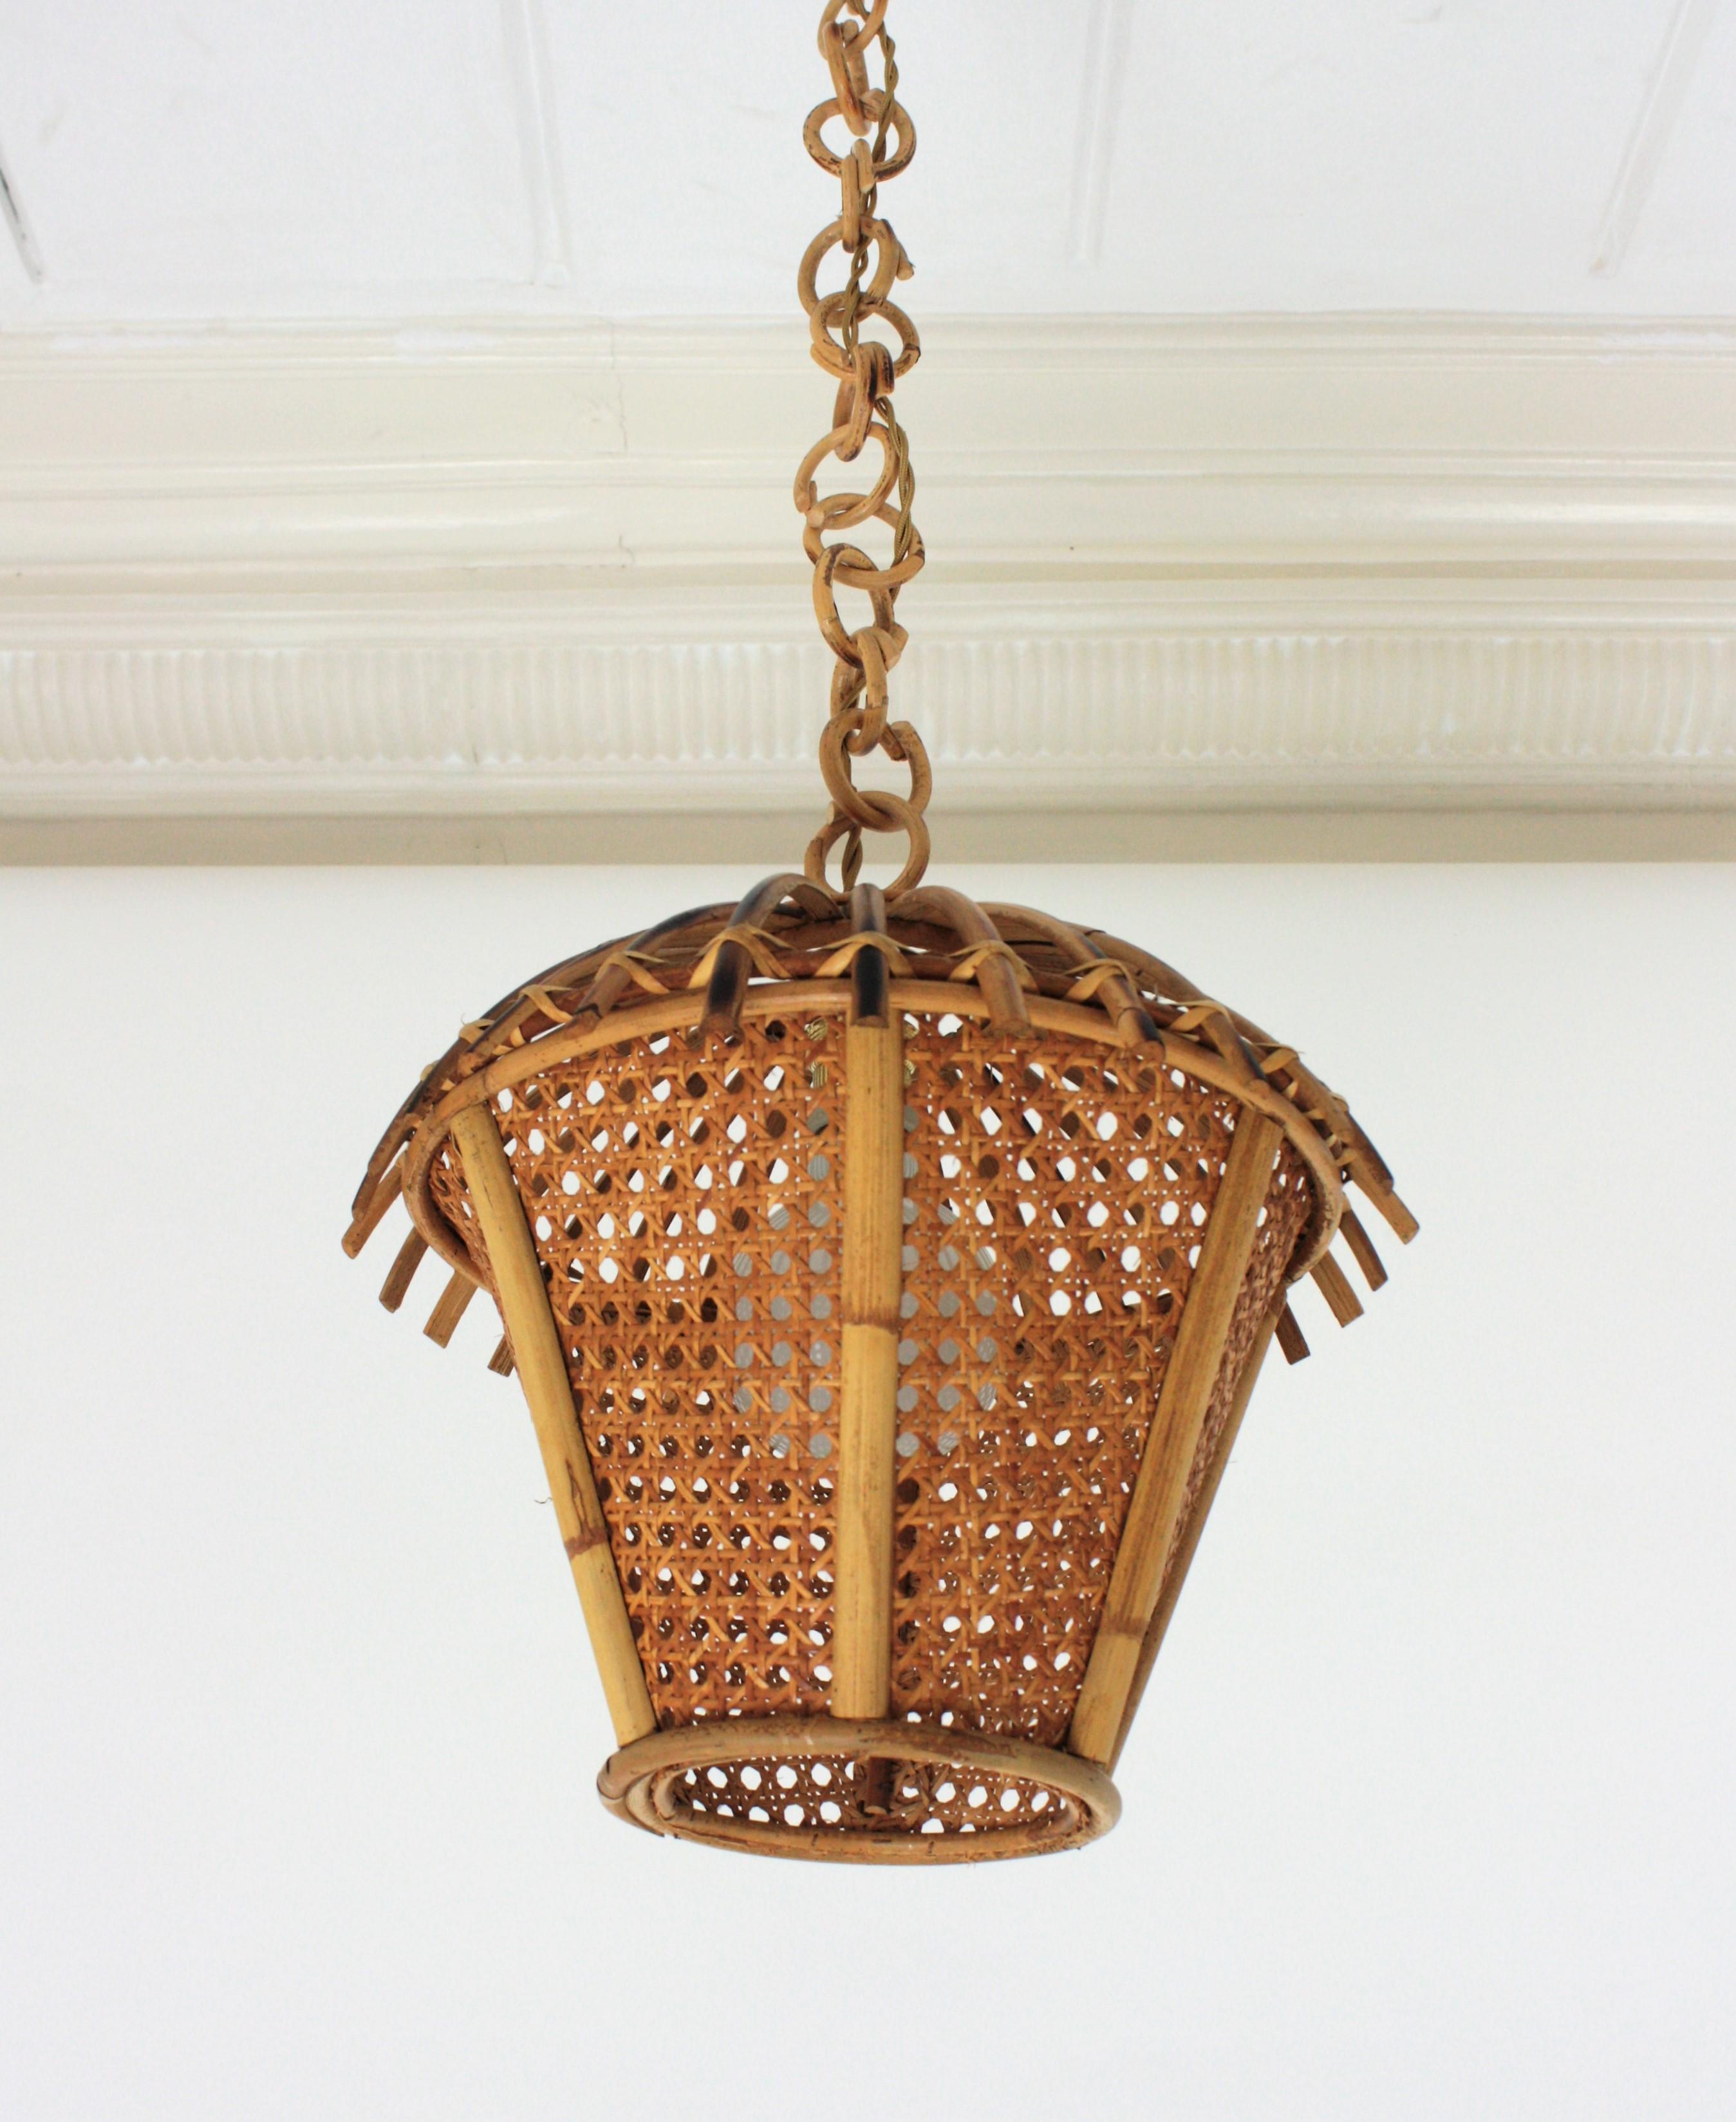 Italian Modernist Rattan and Wicker Wire Pagoda Pendant Hanging Light, 1960s For Sale 2